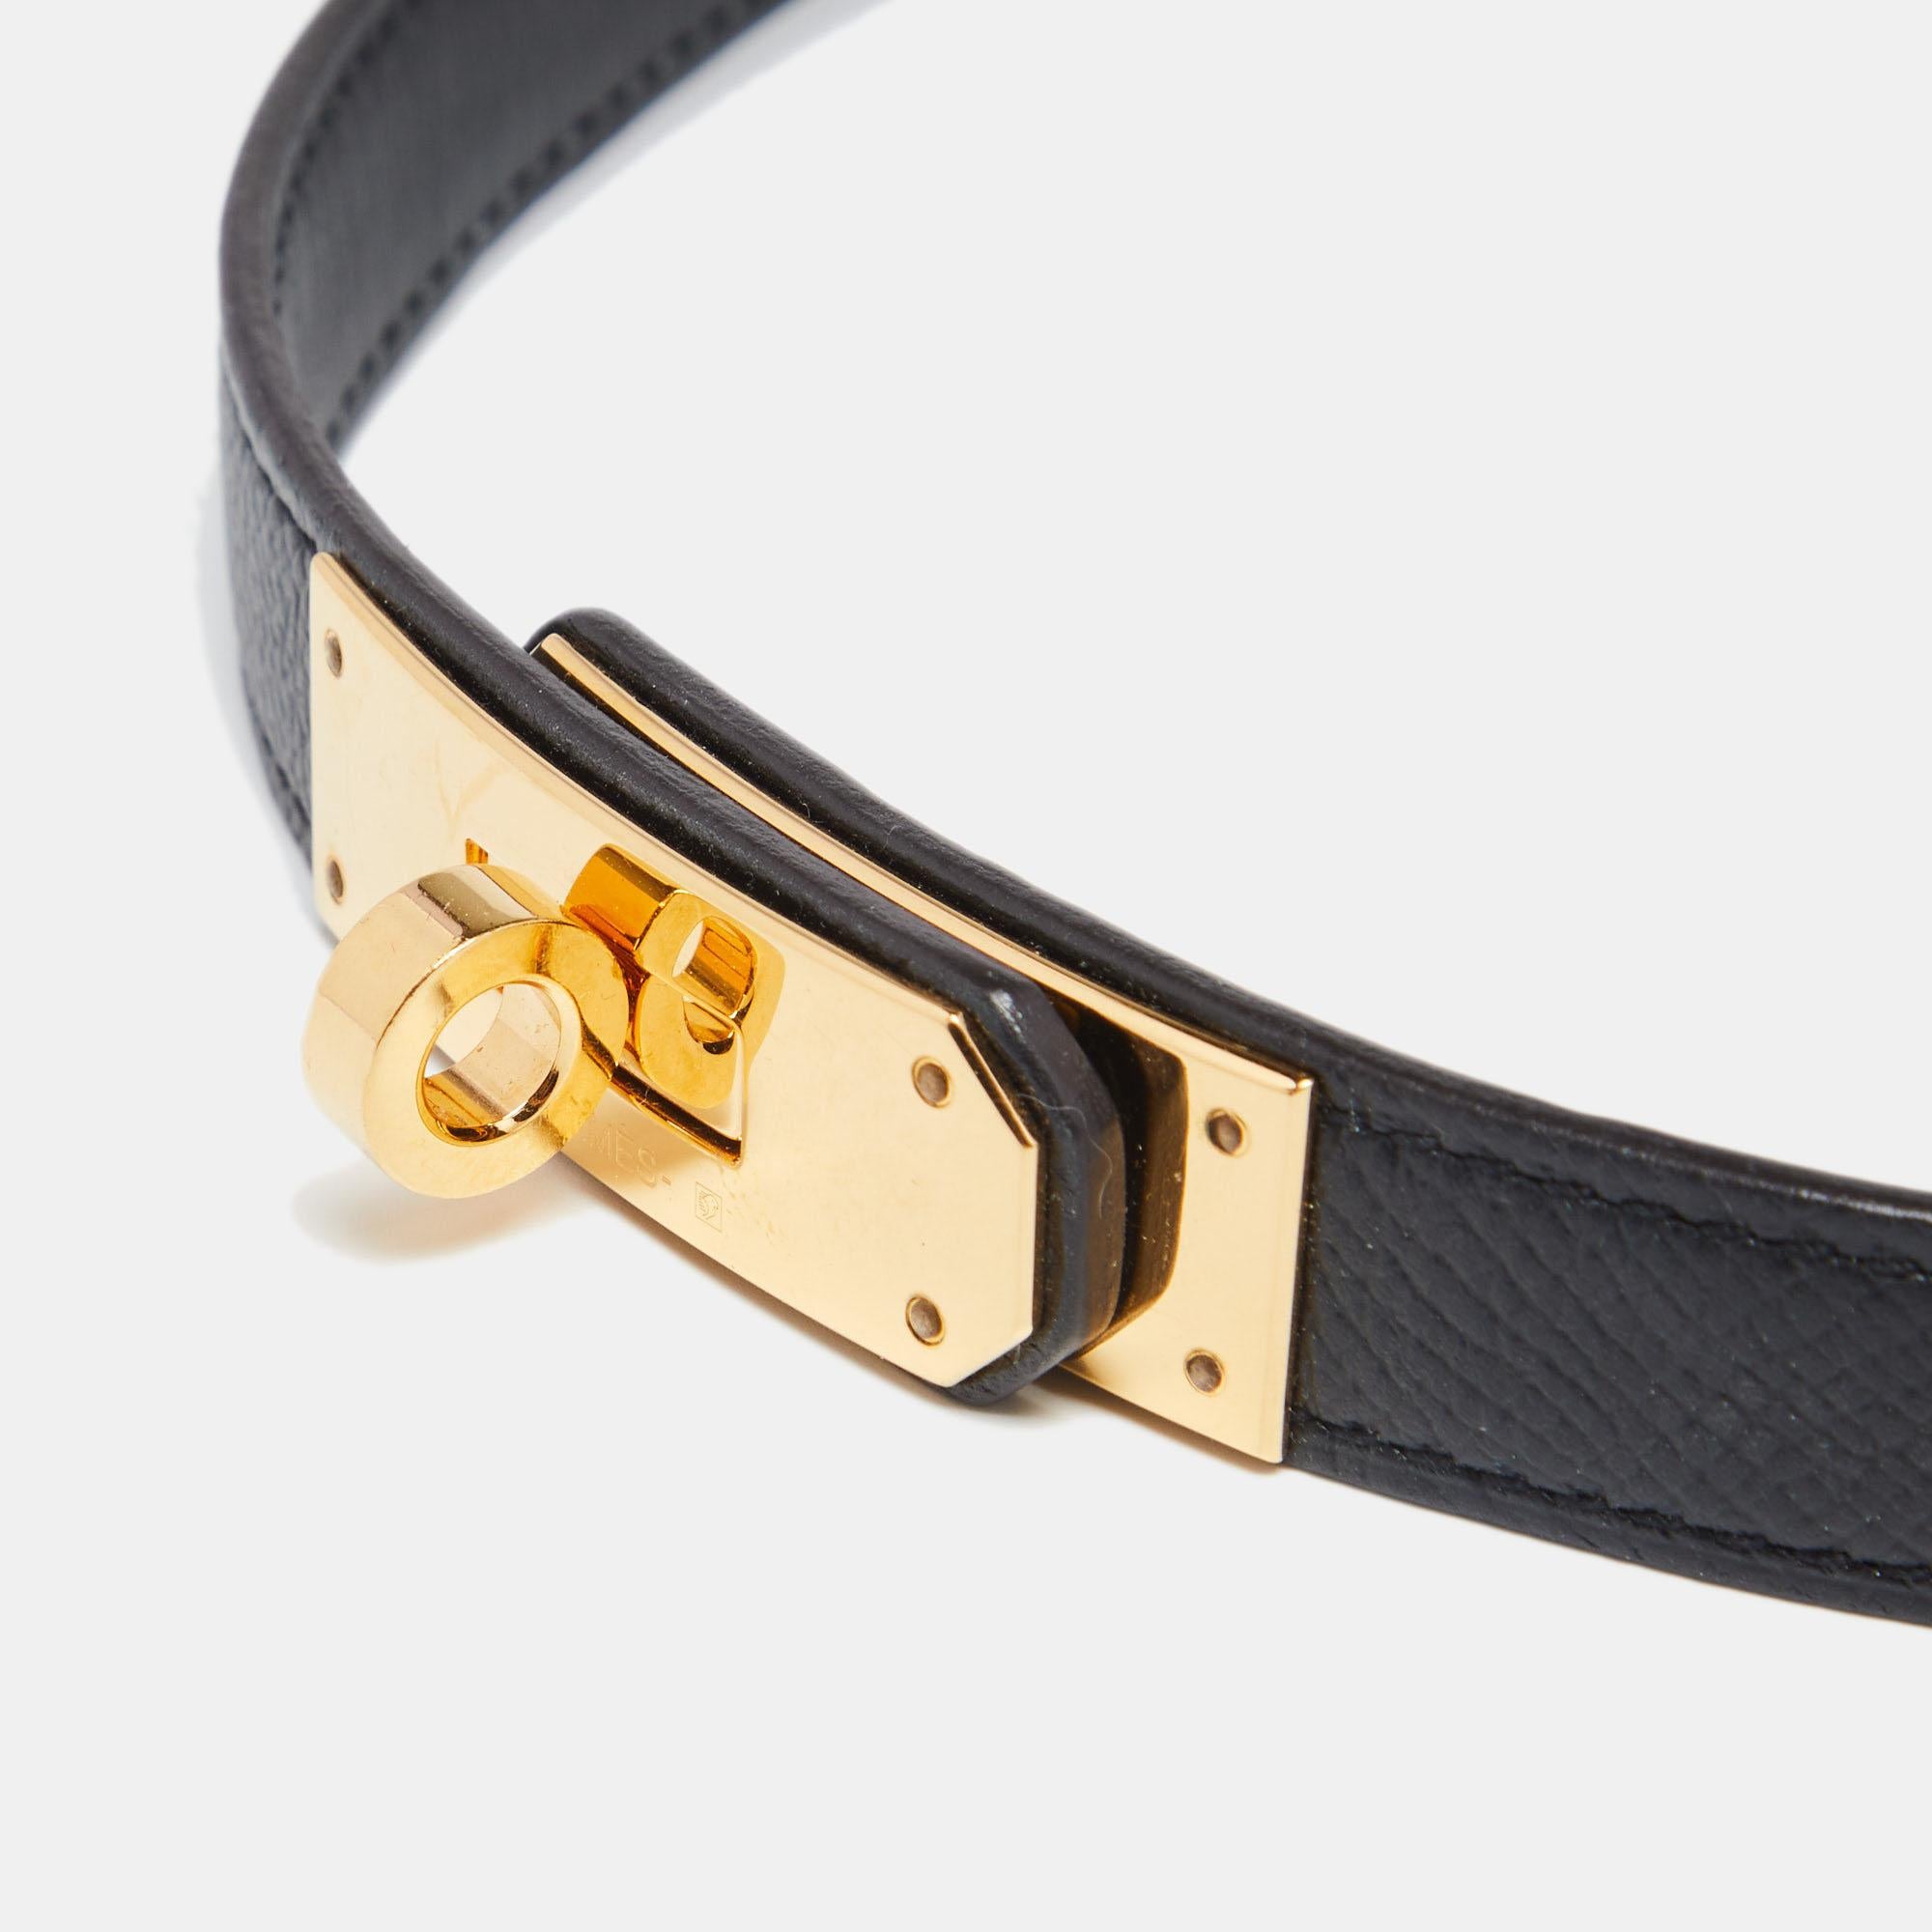 Coming from the House of Hermes, this Kelly 18 belt will certainly grant signature beauty and luxury to your accessory repertoire. It is crafted from black Swift and Epsom leather, which is garnished with gold-finished hardware. This sturdy belt is